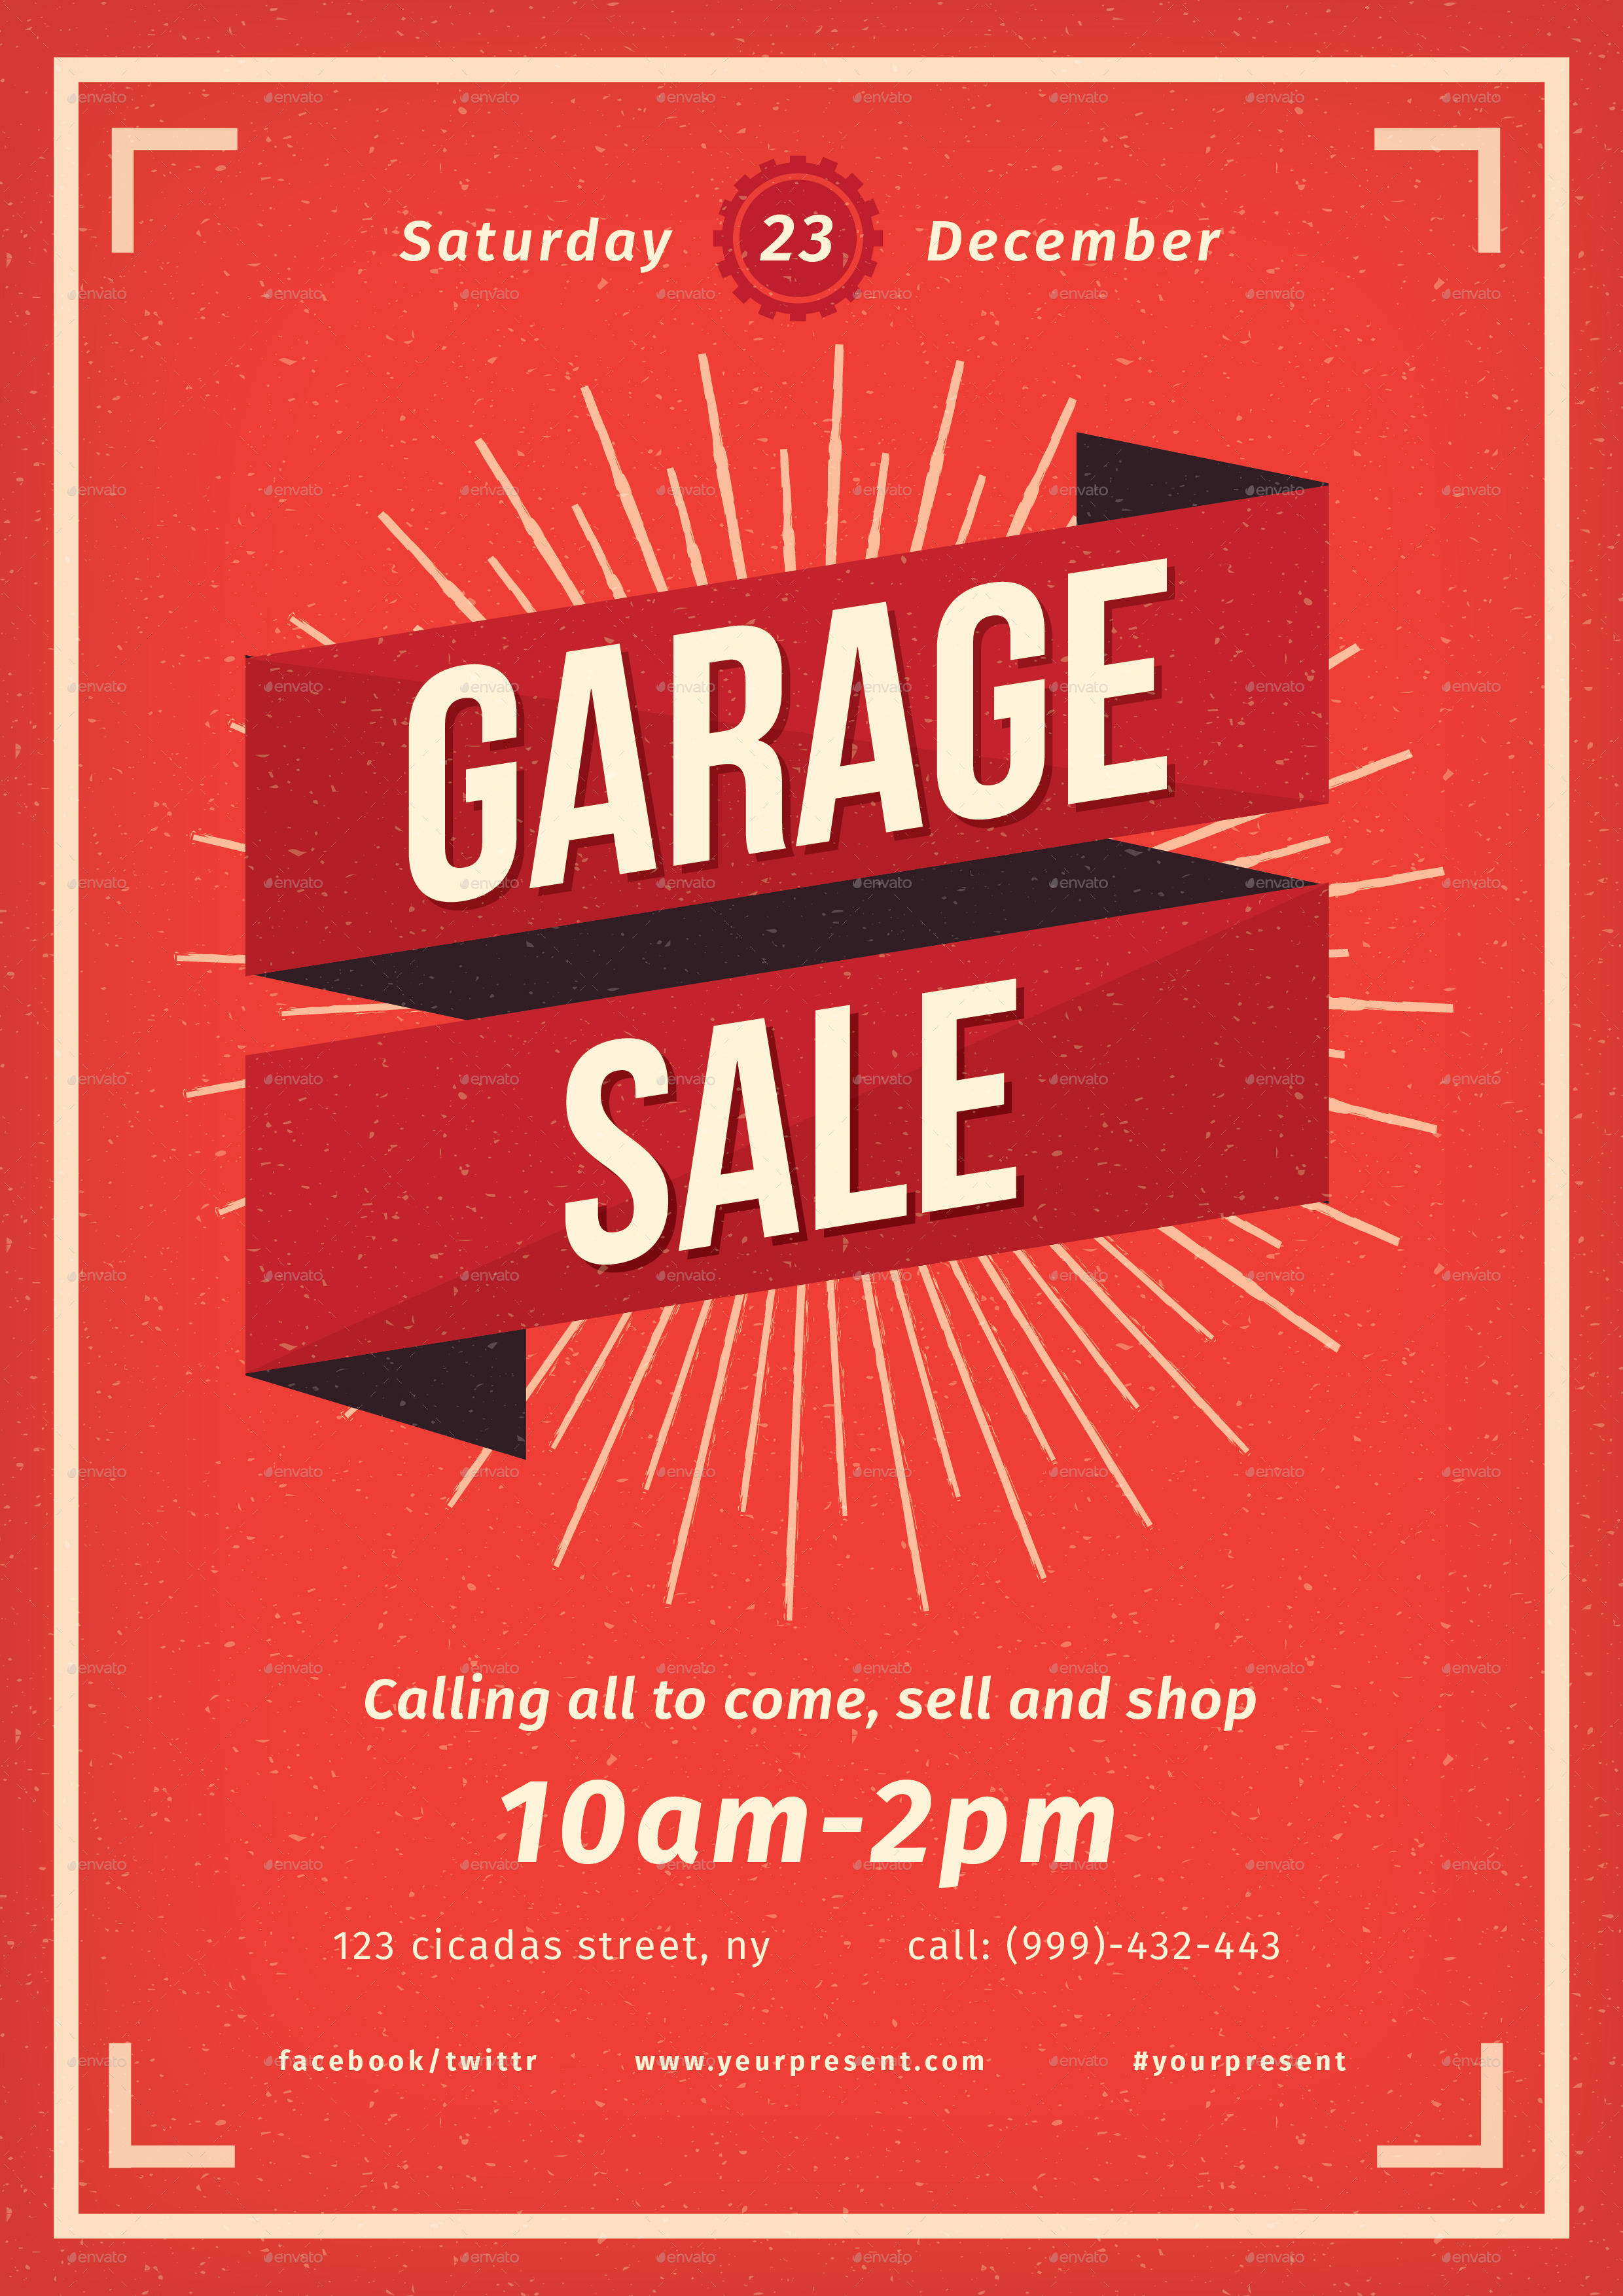 Vintage Garage Sale flyer by lilynthesweetpea  GraphicRiver Regarding Yard Sale Flyers Free Templates